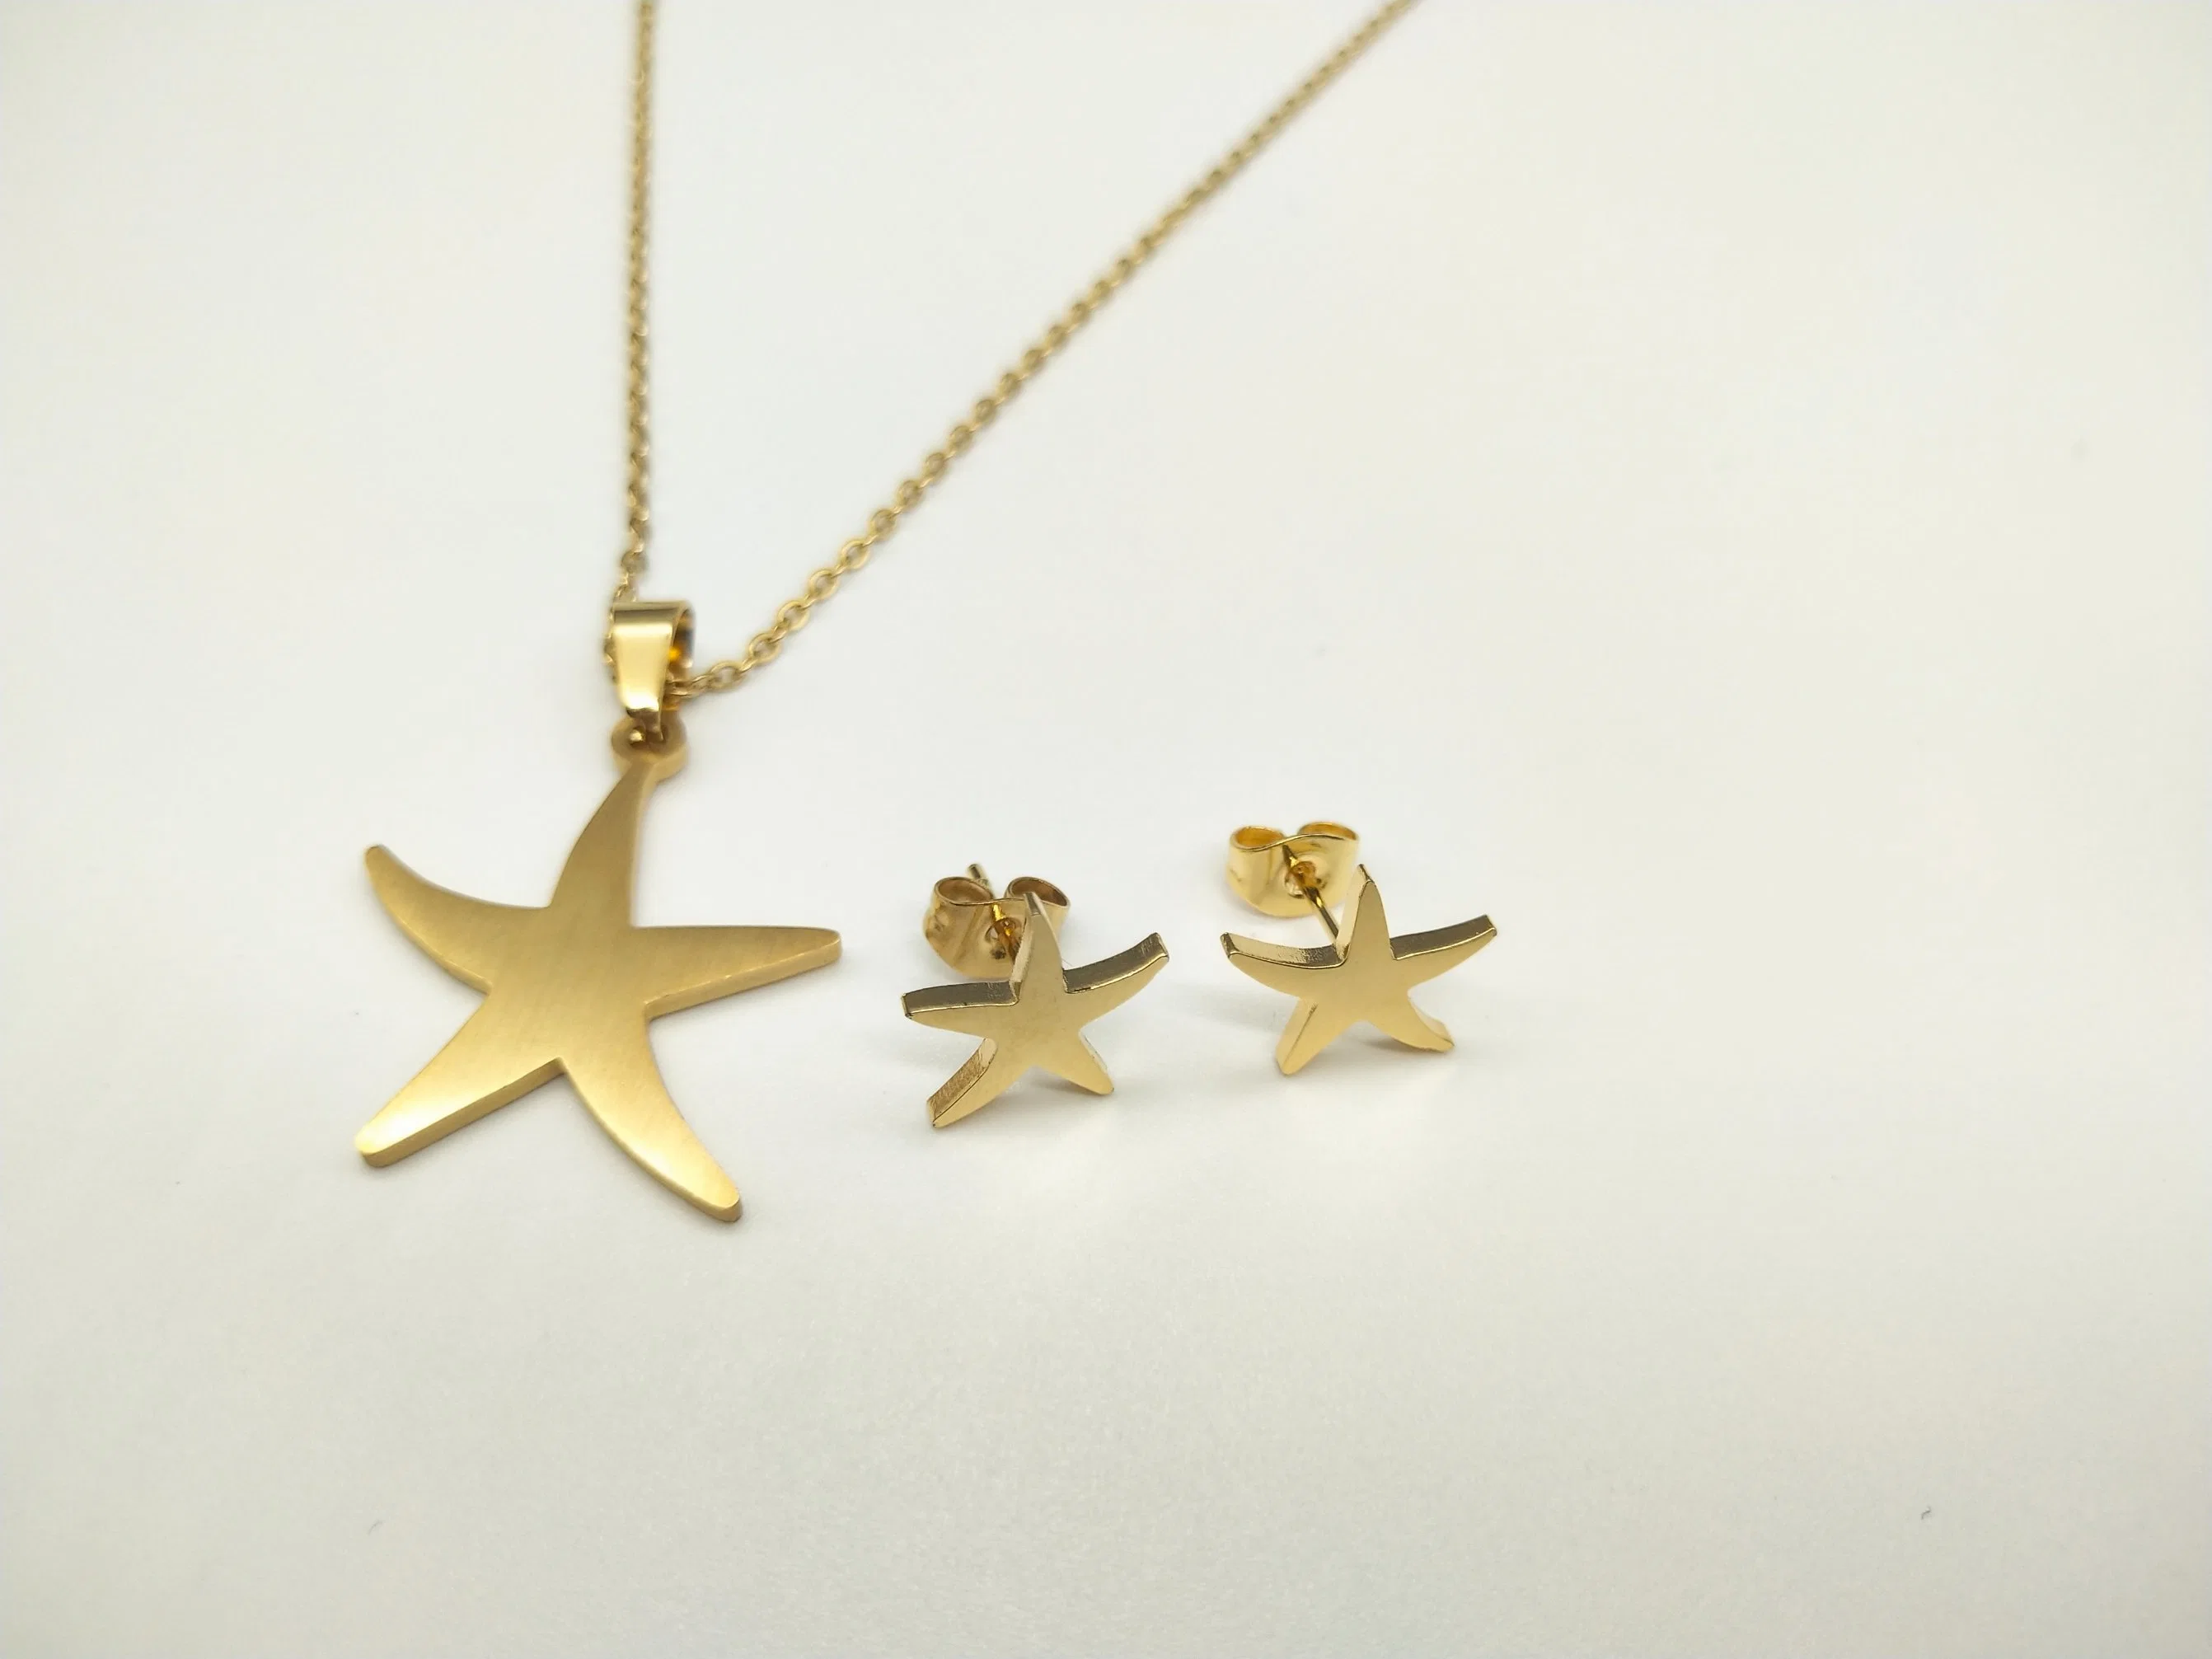 Wholesale Fashion Stainless Steel Jewelry Starfish Pendant Necklace Earring Jewelry Set for Ladies